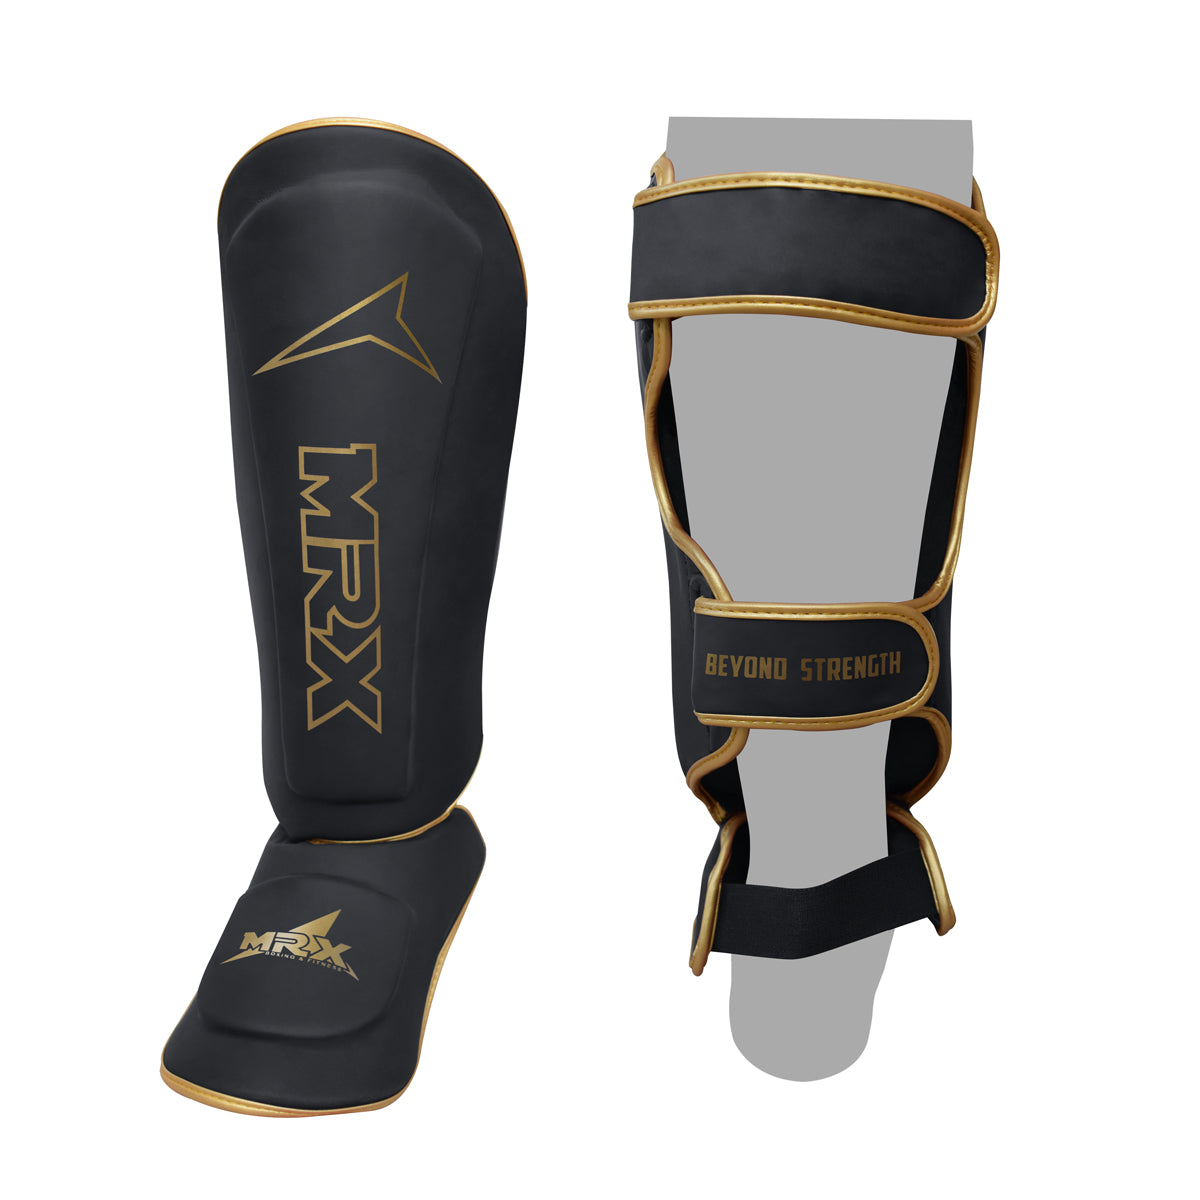 MRX BOXING & FITNESS Shin Guards Pads for Boxing MMA Muay Thai Kickboxing Training Workout Extra Padding Protective Gear Men Women